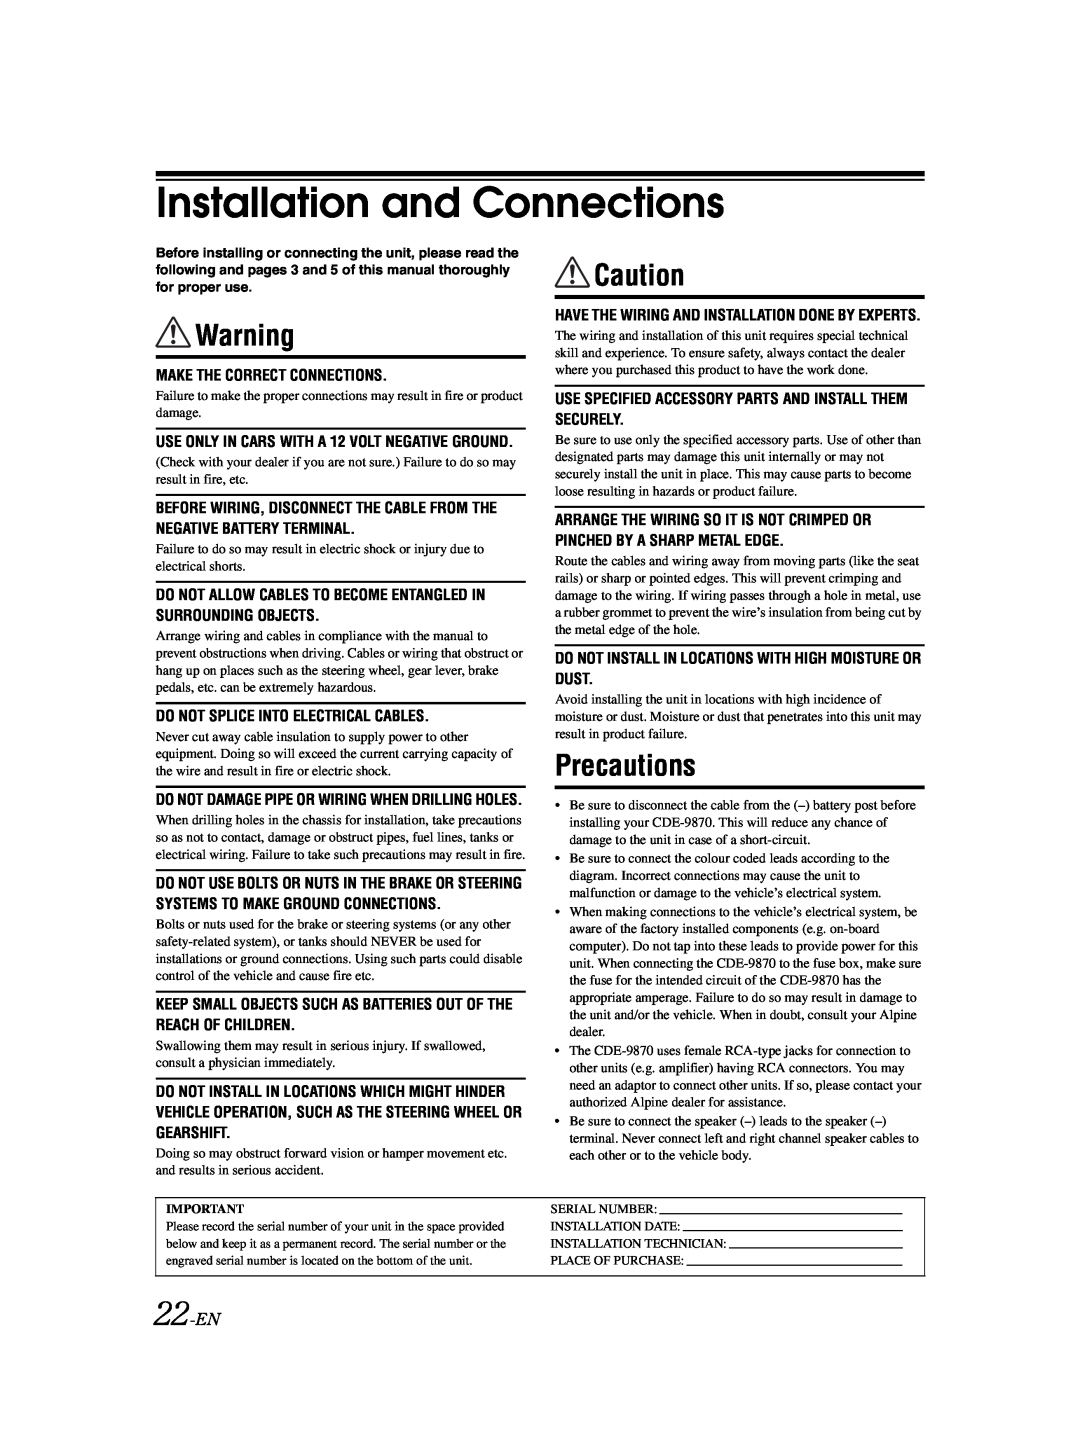 Alpine CDE-9870 owner manual Installation and Connections, Precautions, 22-EN 